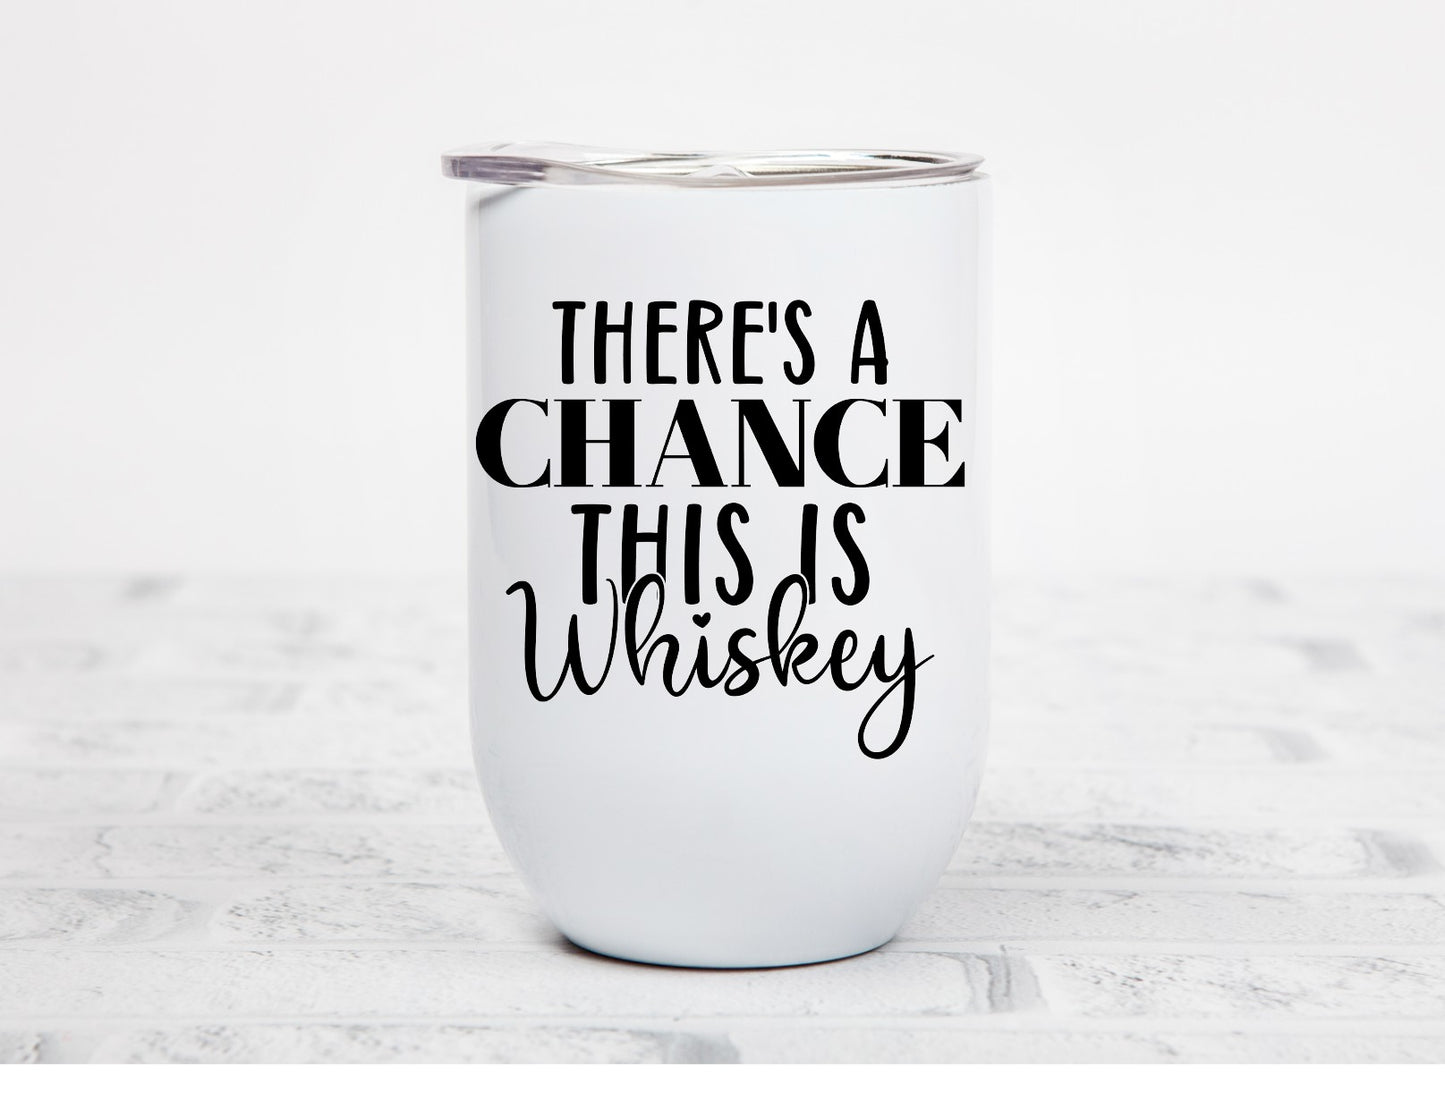 There's A Chance This is Whiskey